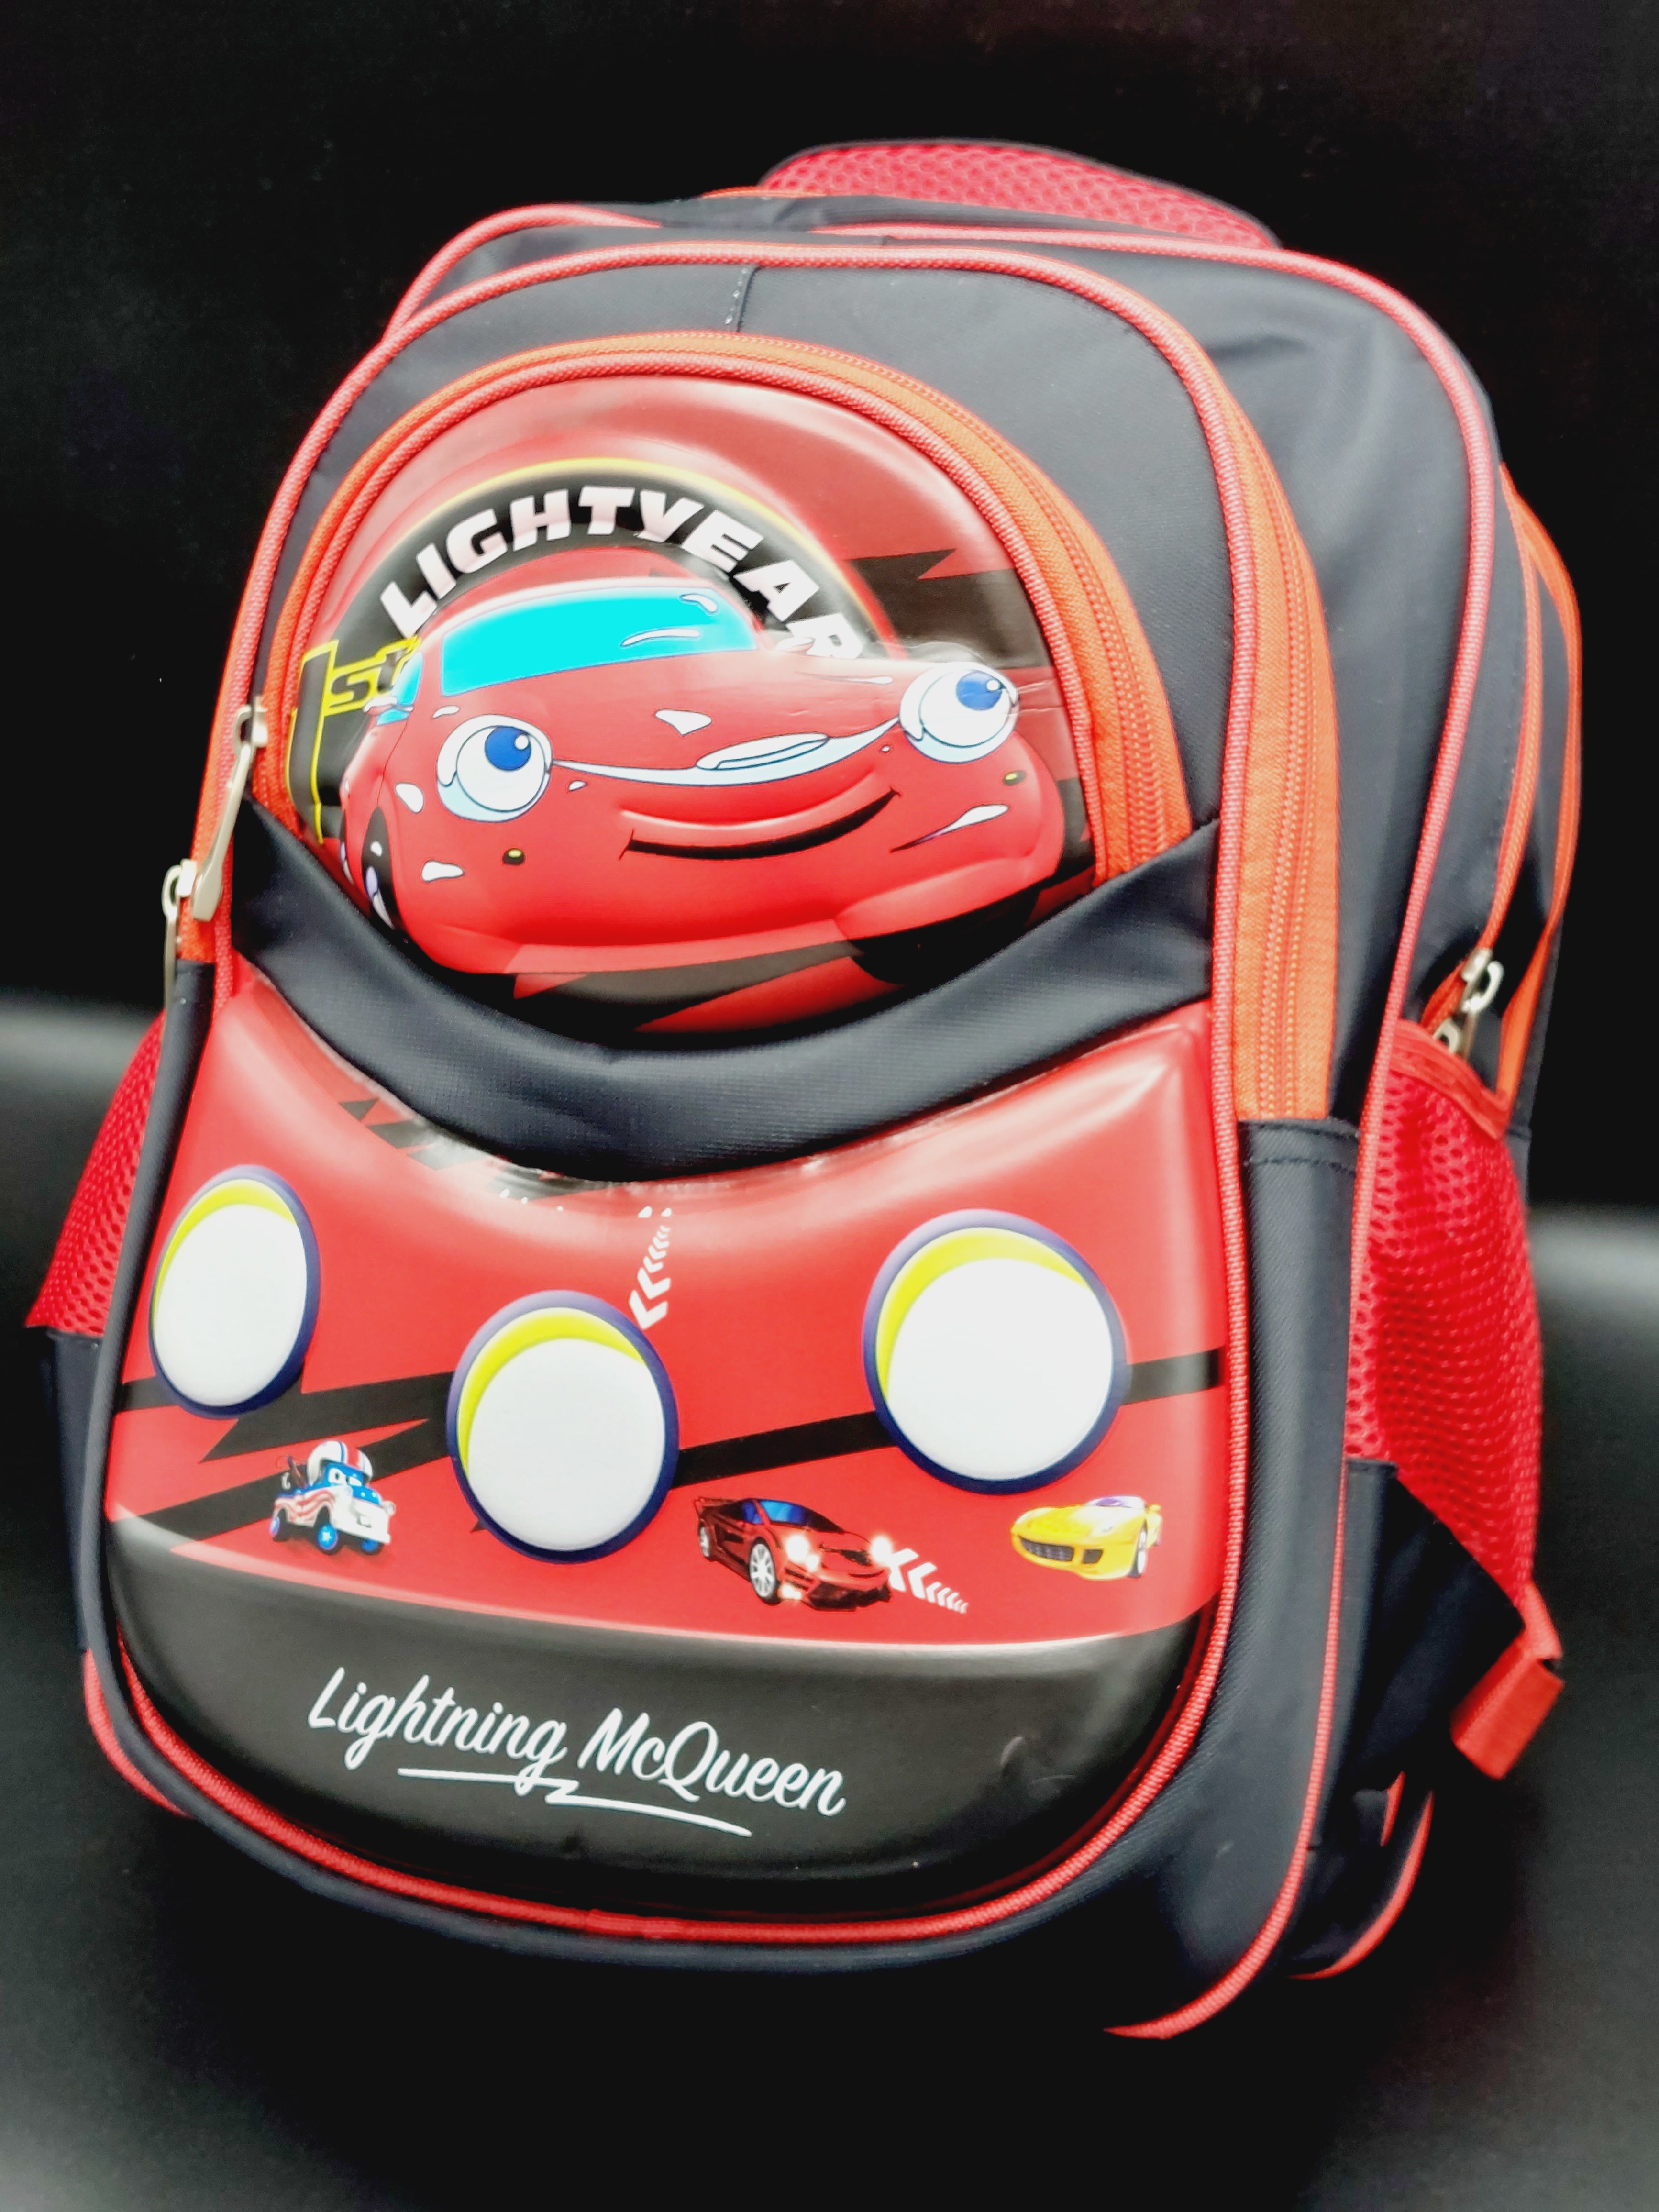 Disney Cars Boys Lightning McQueen Backpack with Lunch Bag Water